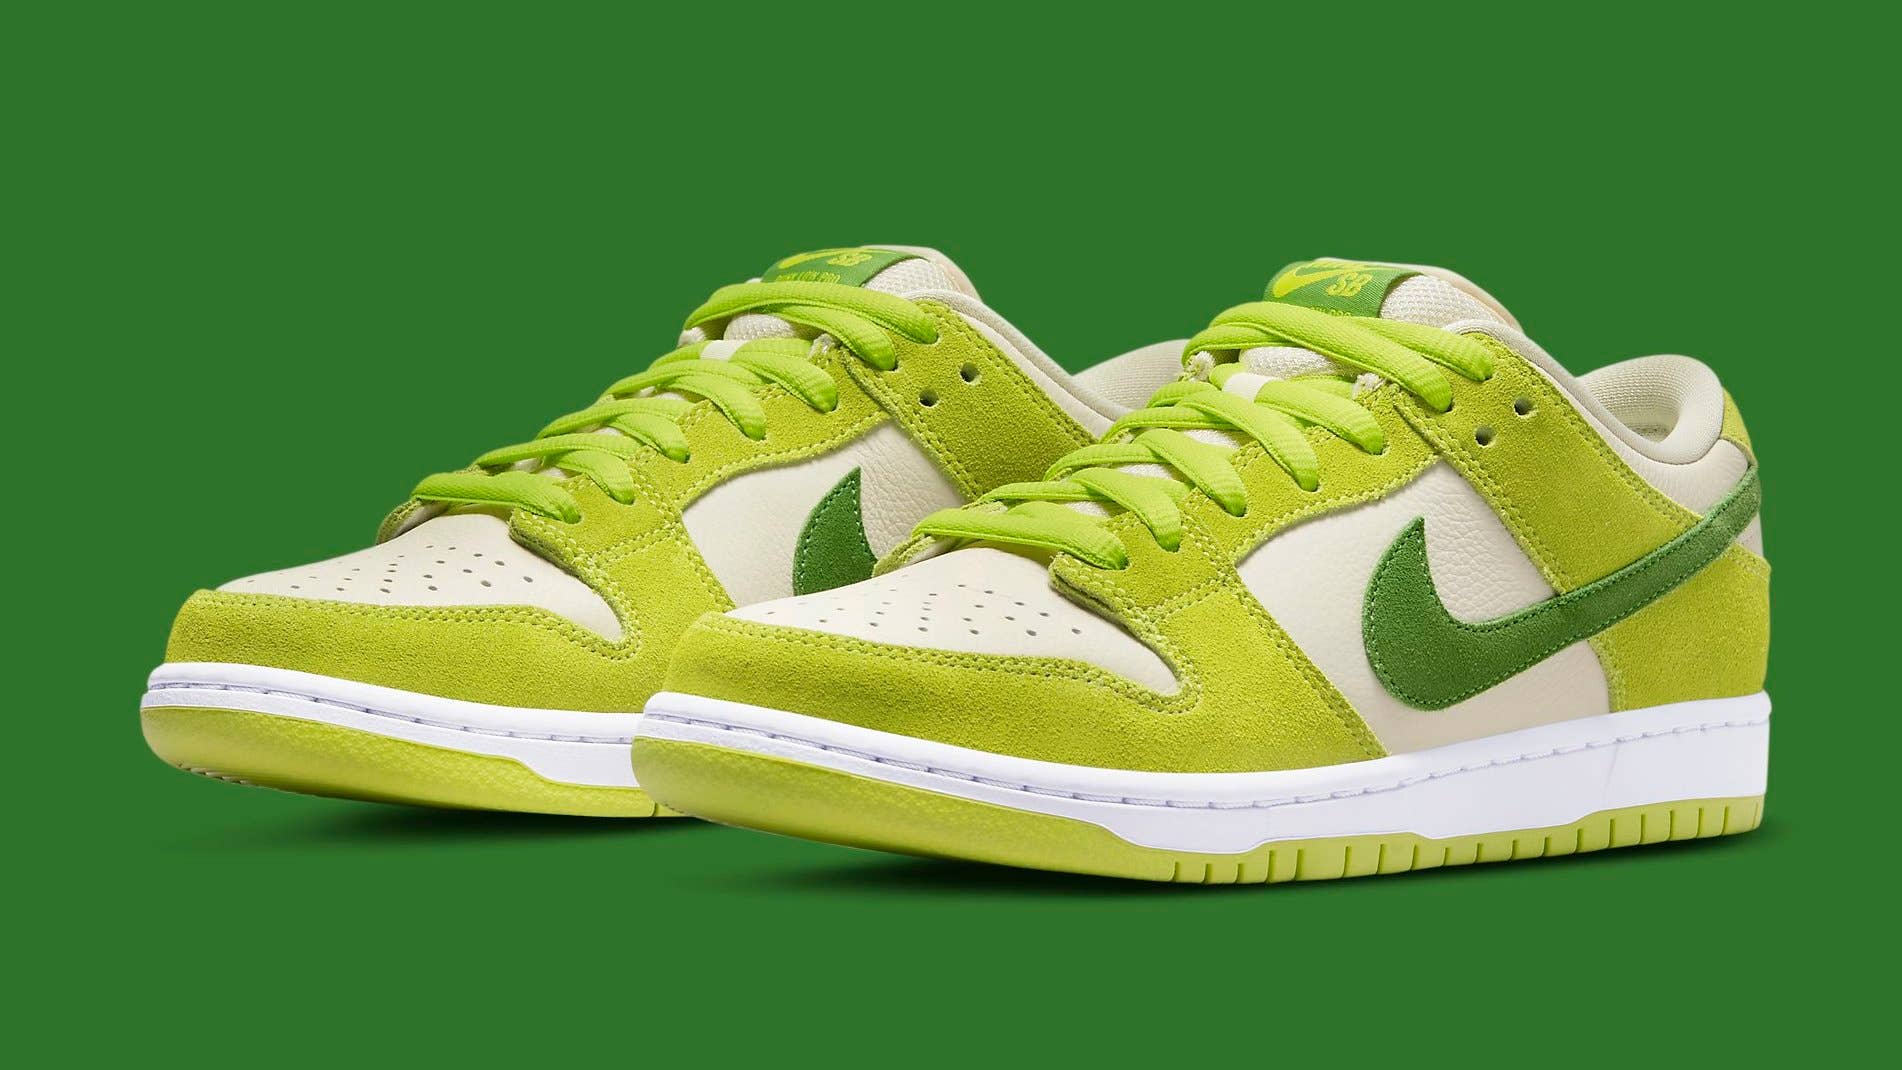 Best Look Yet At The 'Green Apple' Nike Sb Dunk | Complex